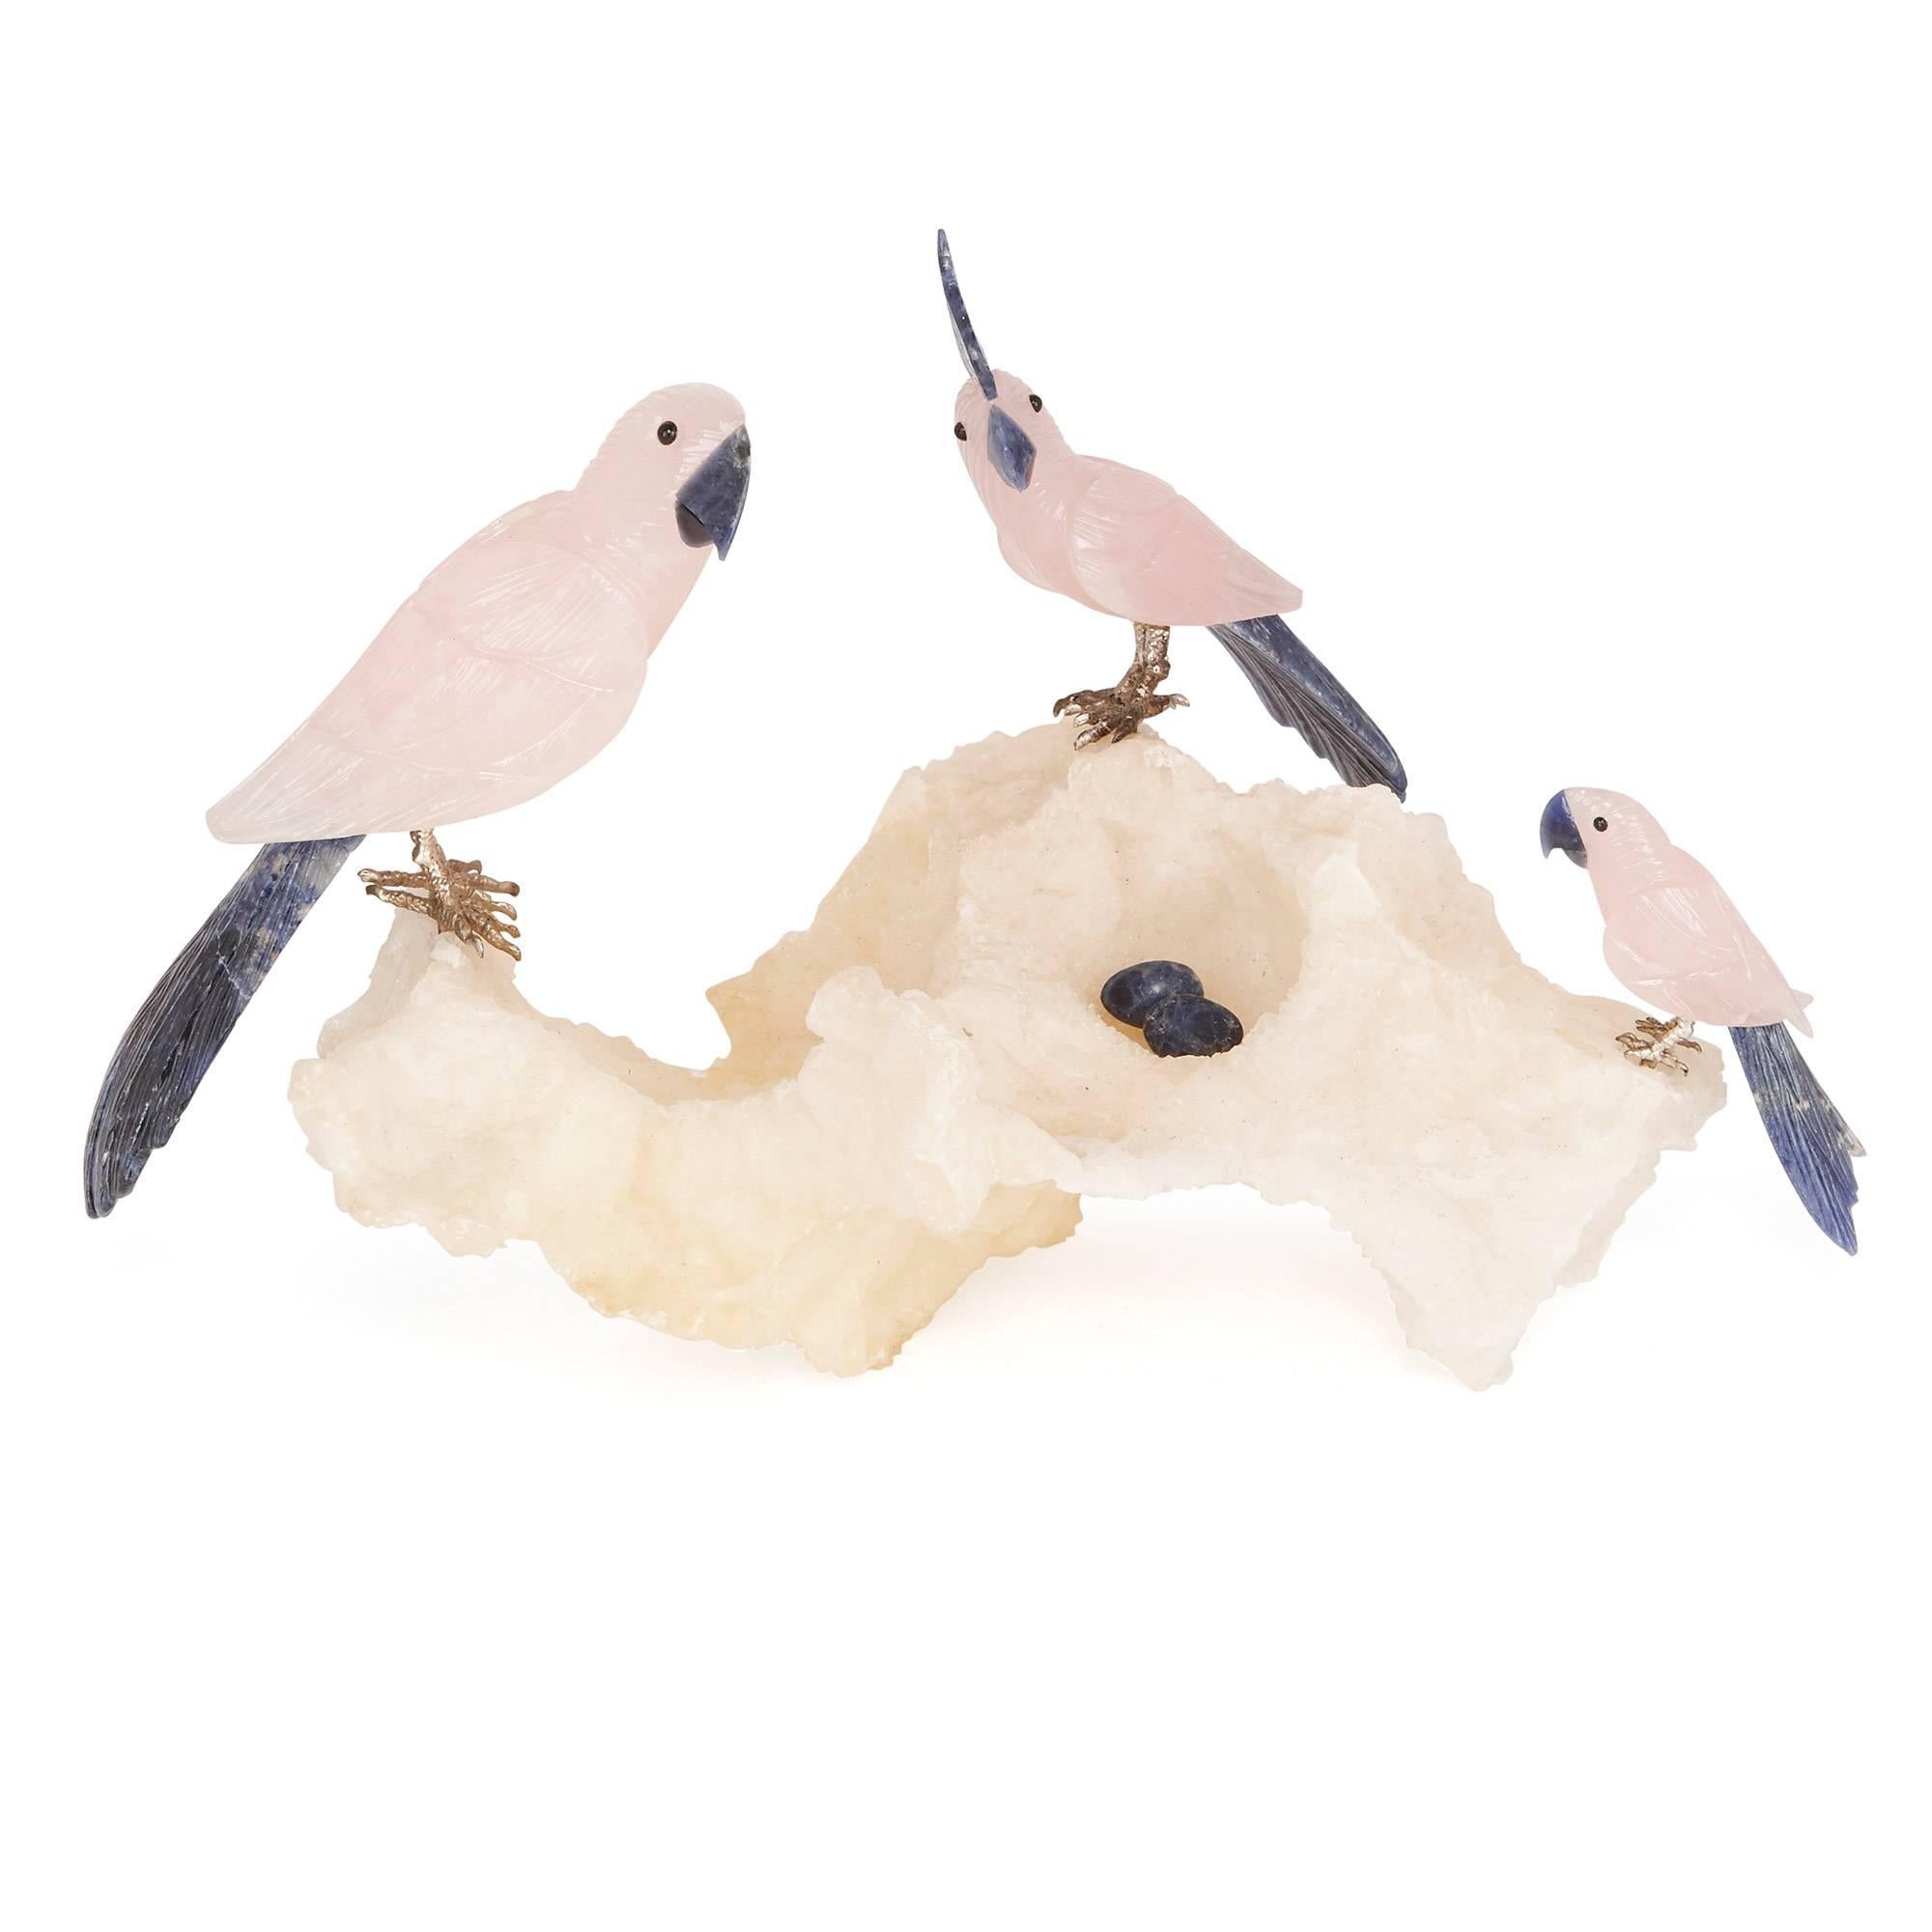 These delightful objets d'art are composed of the beautiful gemstones rosequartz and sodalite, and have been carefully sculpted to resemble five cockatoos perching on mineral specimen bases. The body of each cockatoo is sculpted from the pink